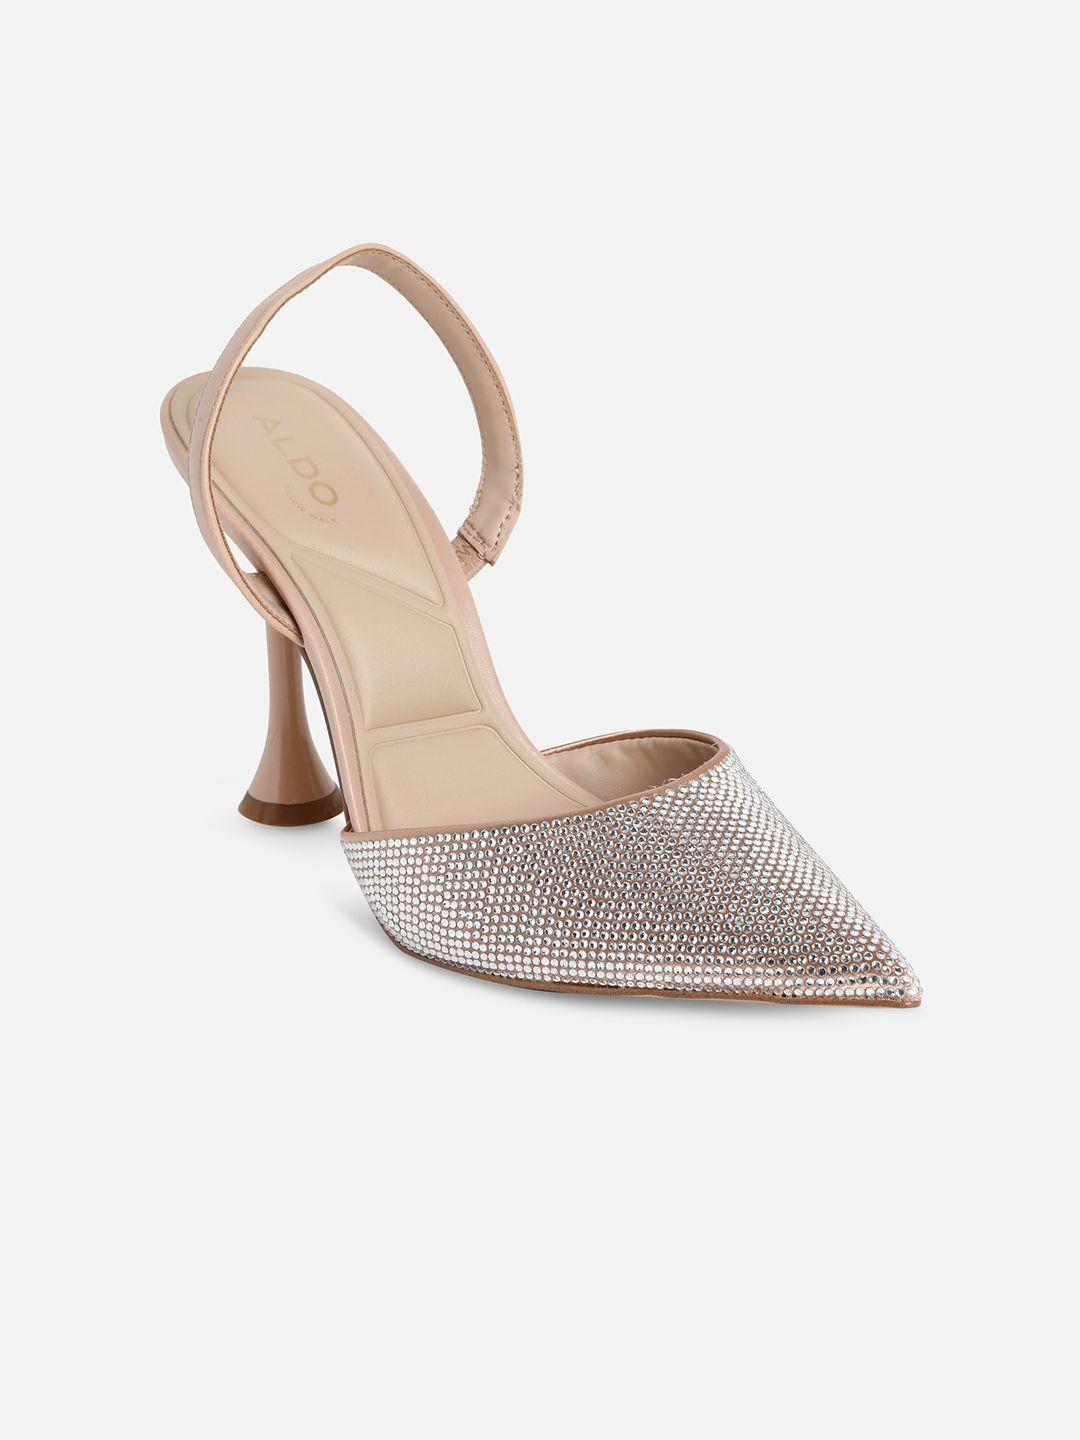 aldo pointed toe embellished party leather mules with backstrap